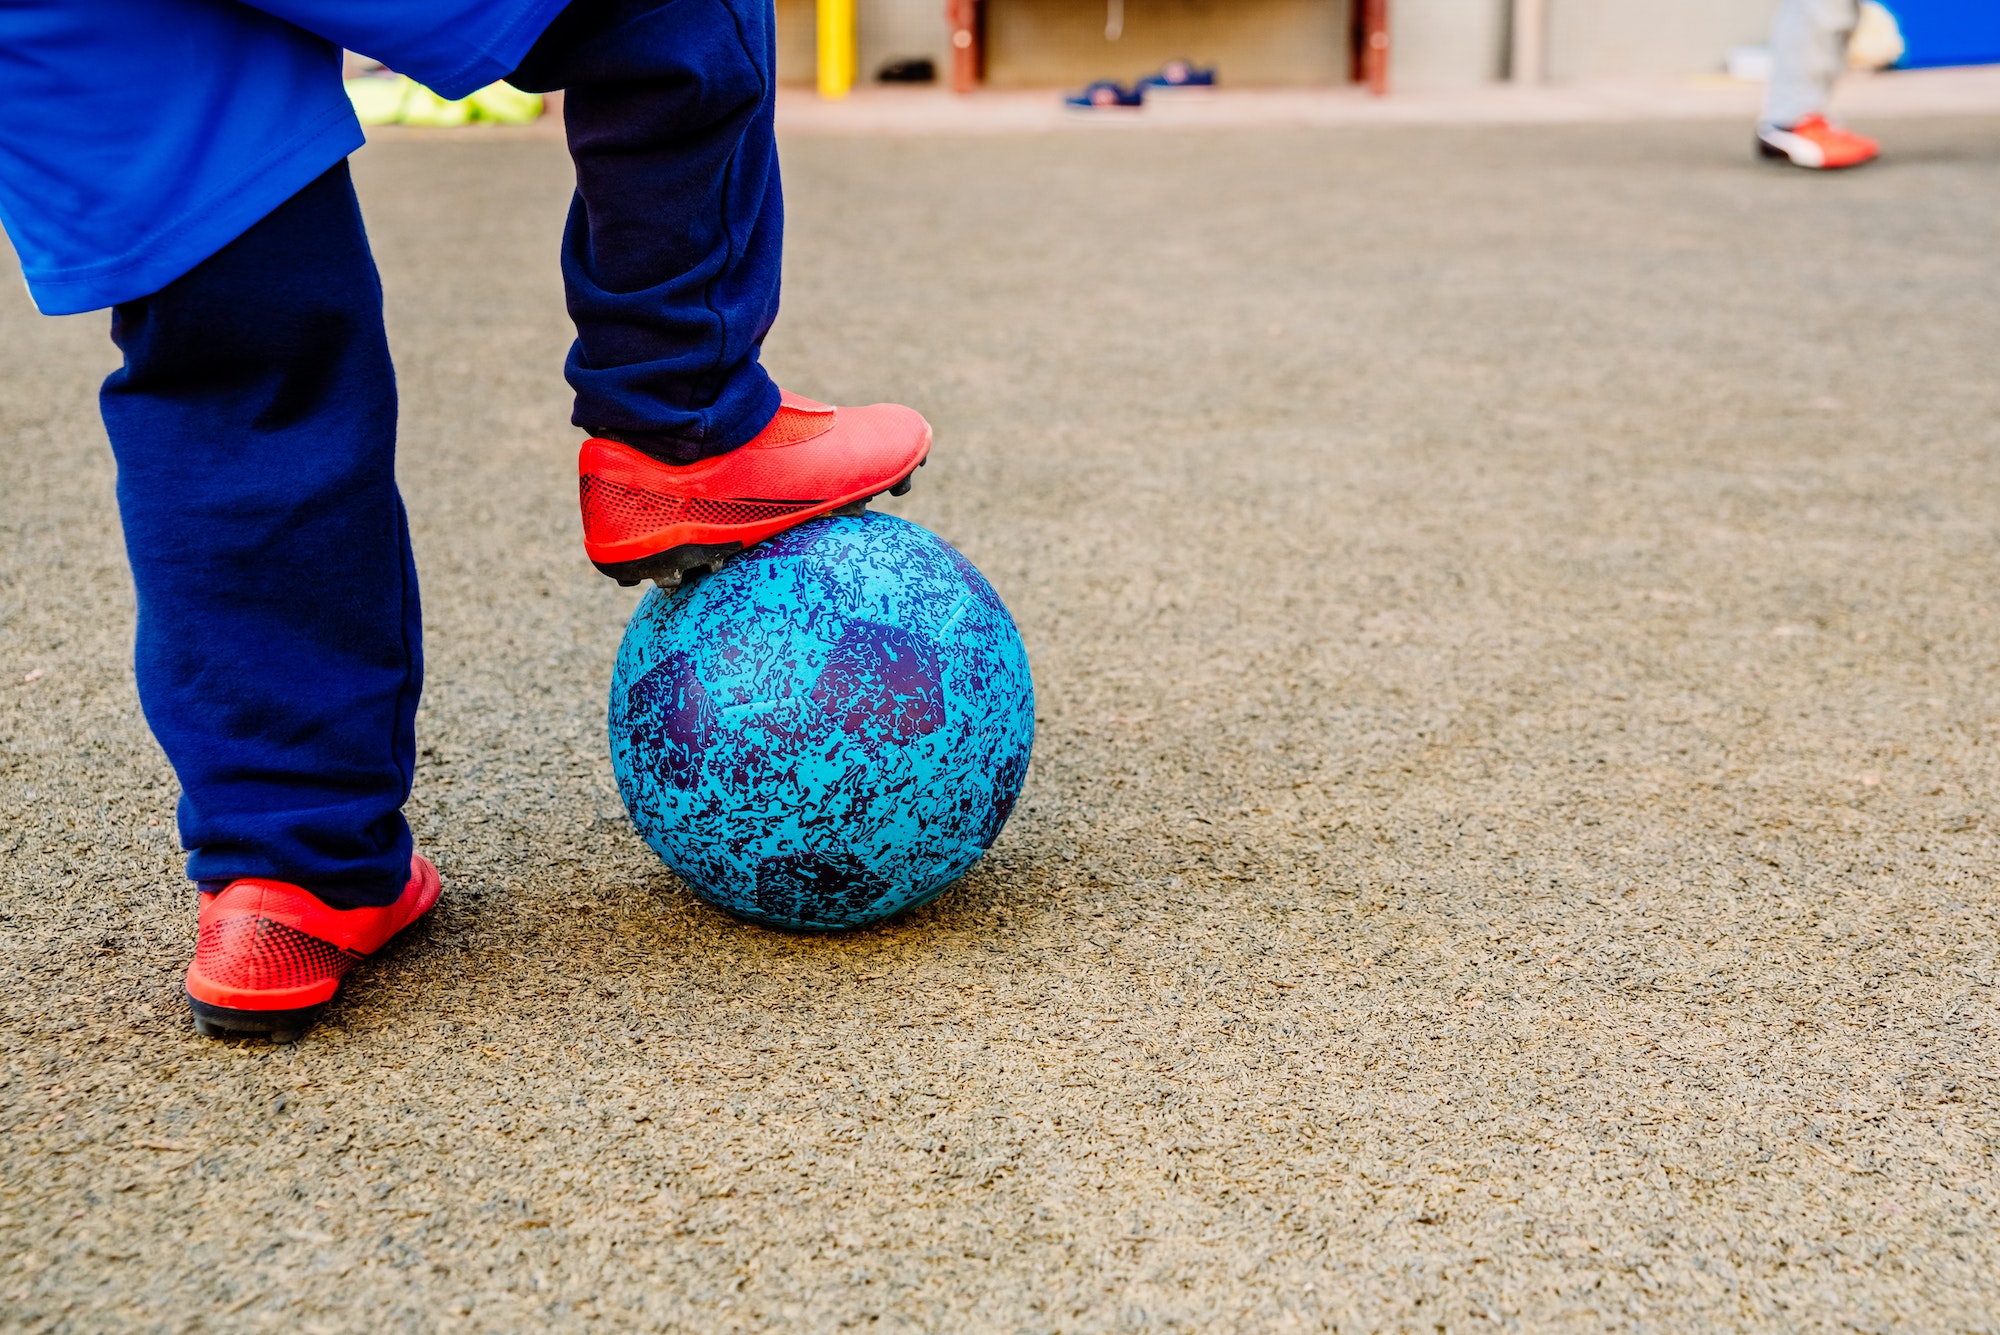 Soccer is the sport preferred by children because of the game with the ball.